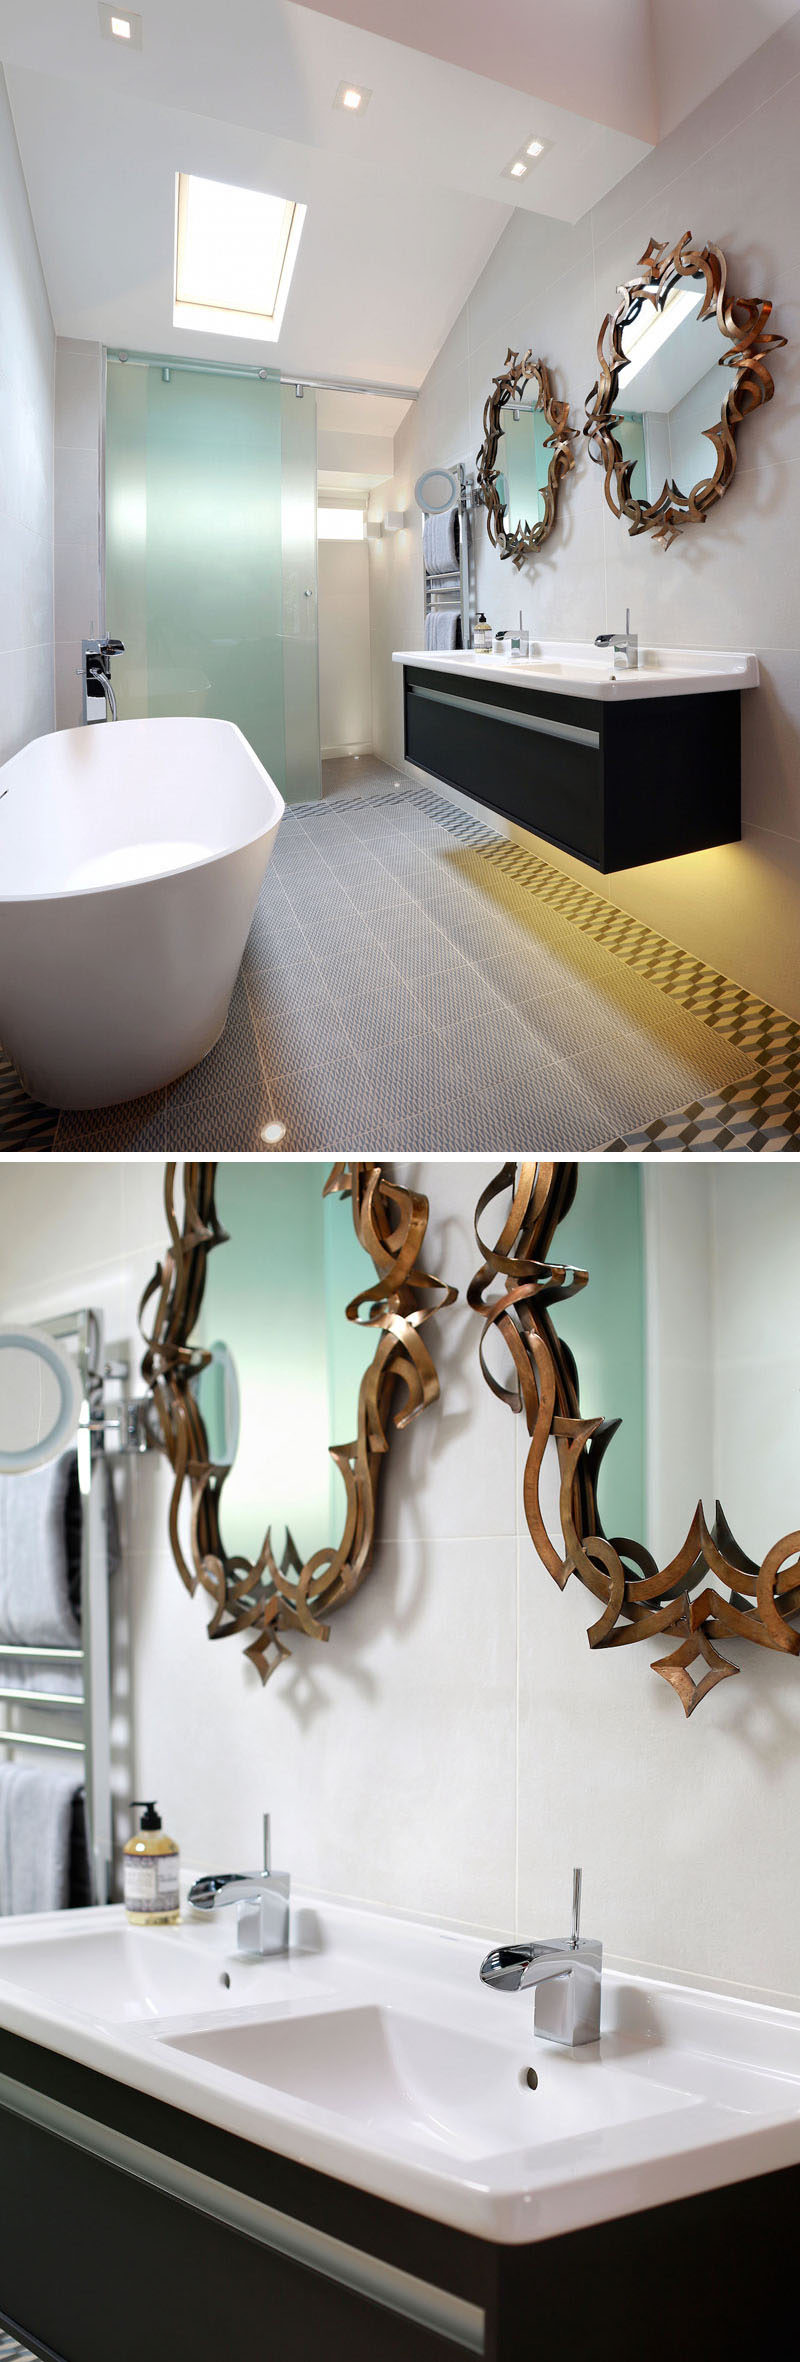 The bath in this bathroom was positioned facing the bedroom to allow views of the garden beyond, and an opaque glass sliding screen was installed between the toilet and bathroom. An LED strip under the vanity unit, additional wall lights and small in-floor up-lights around the bath completed the look, and bronze mirrors add an artistic touch to the bathroom.